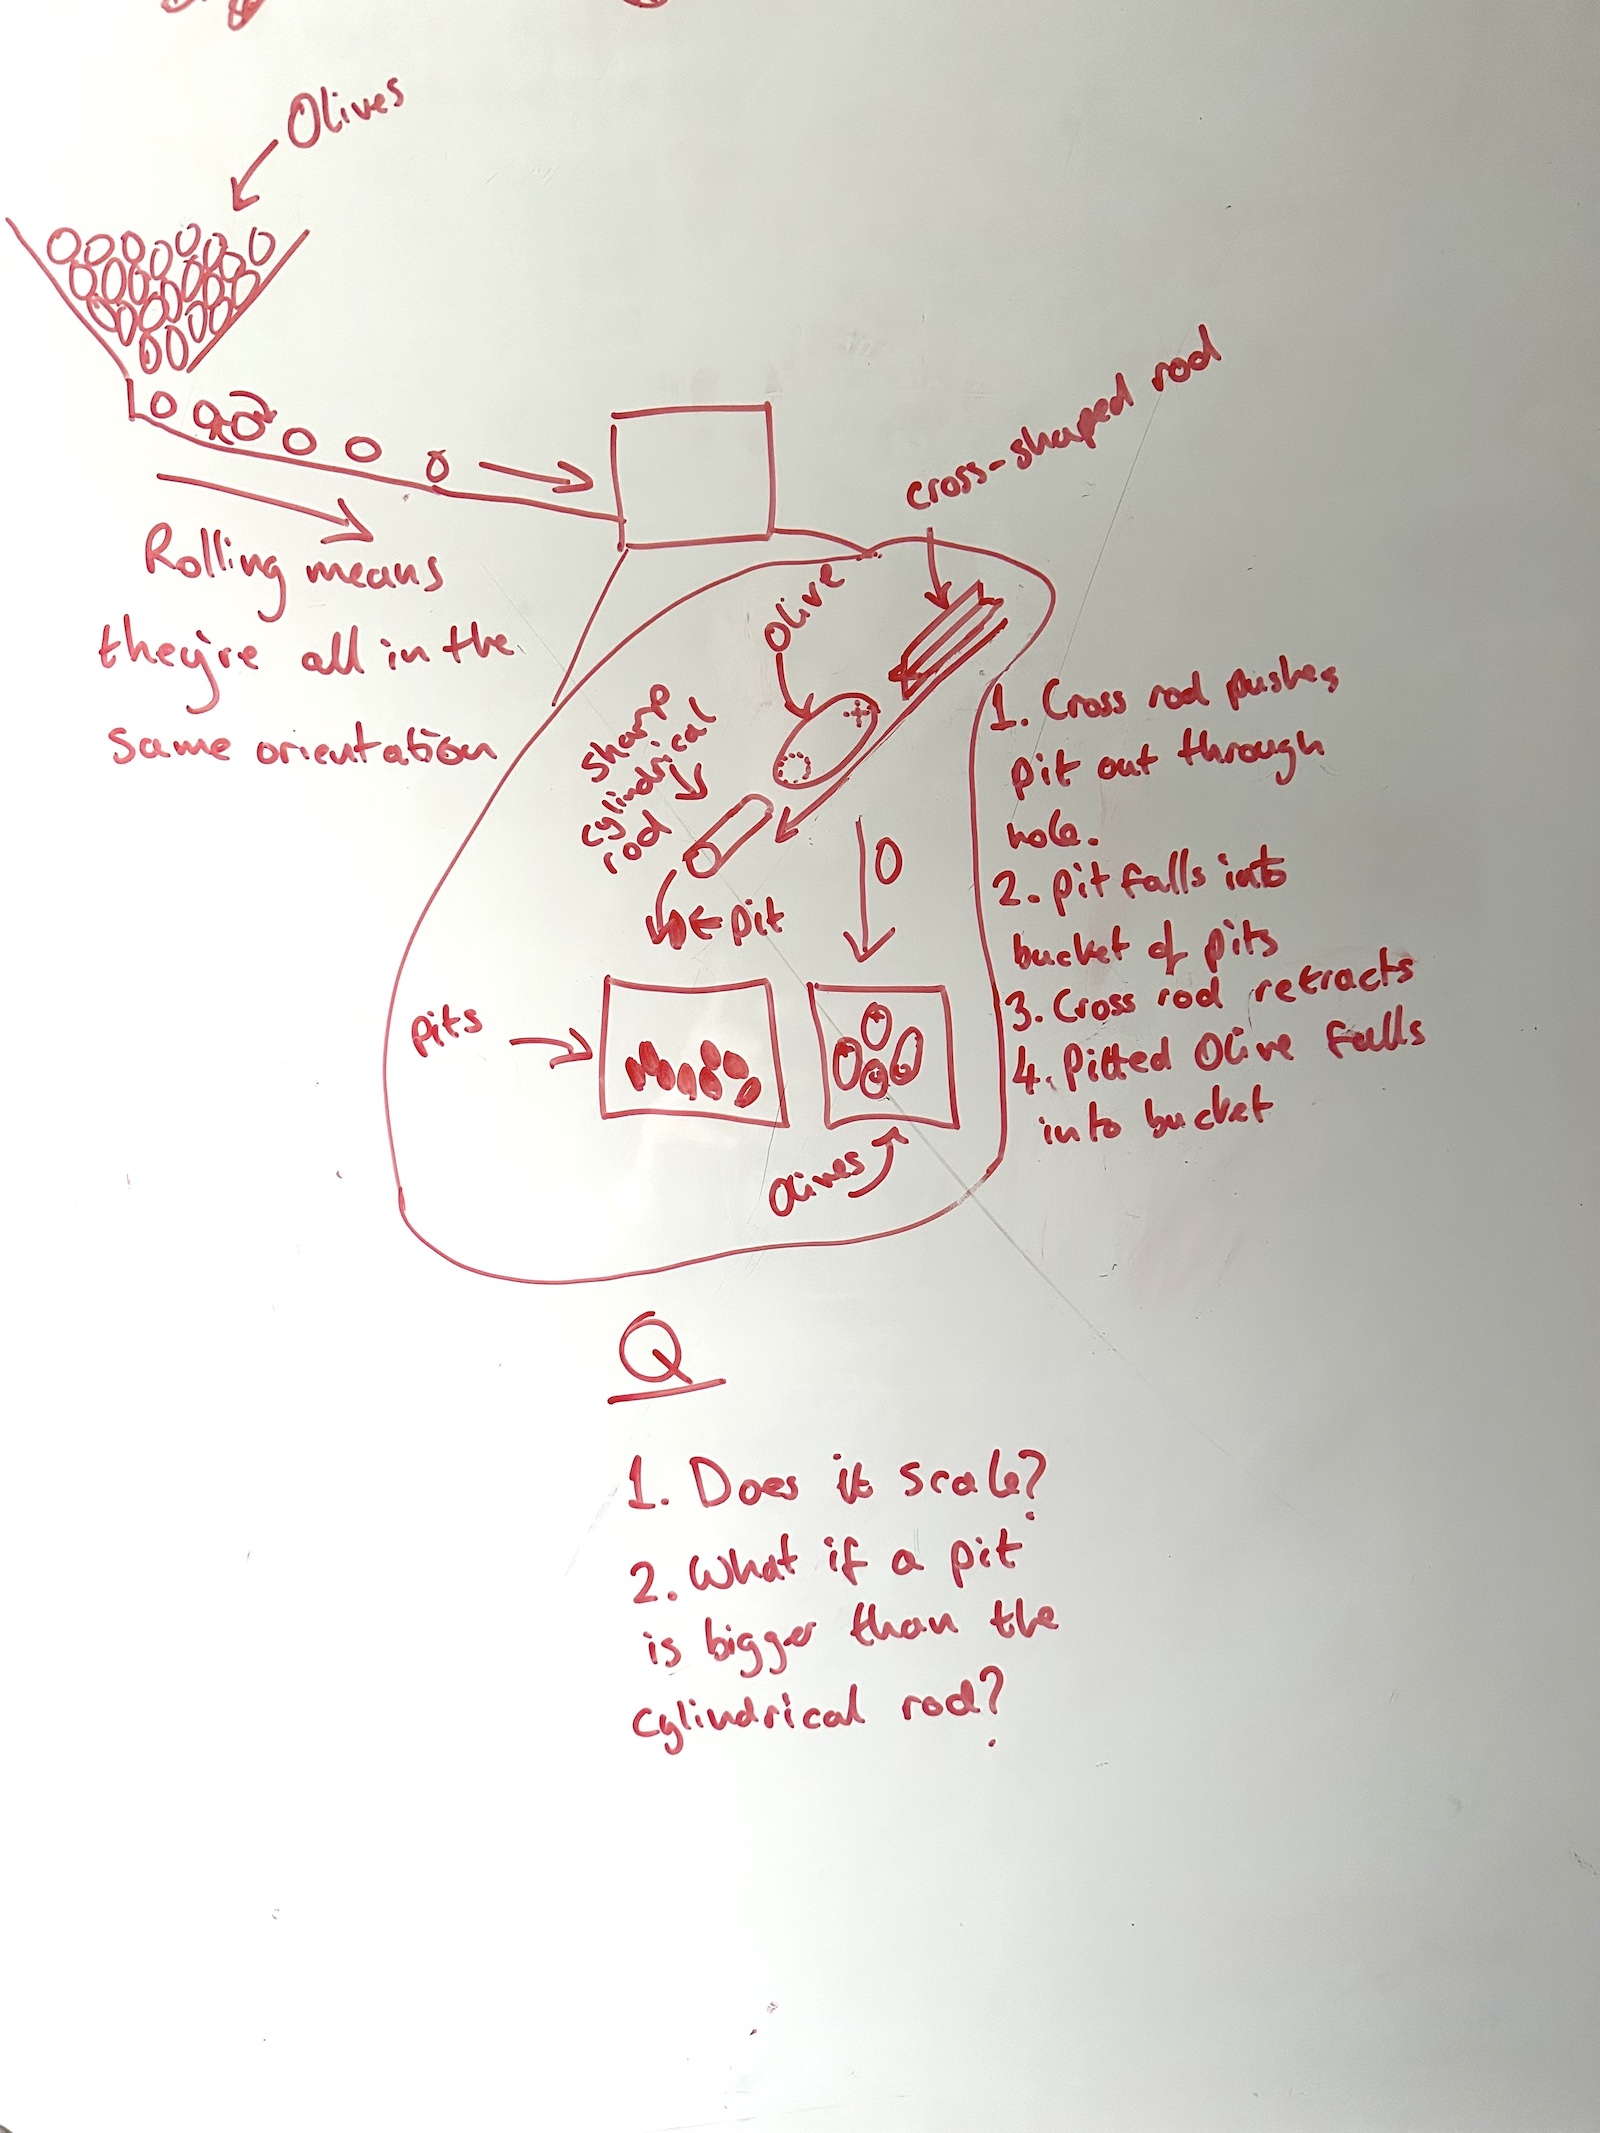 My doodle of how I think an olive pitting machine works. It shows a bit pot of olives with a hole at the bottom. The olives fall out of this hole and roll along a convery belt, giving them a consistent orientation so a device can punch out the pits.